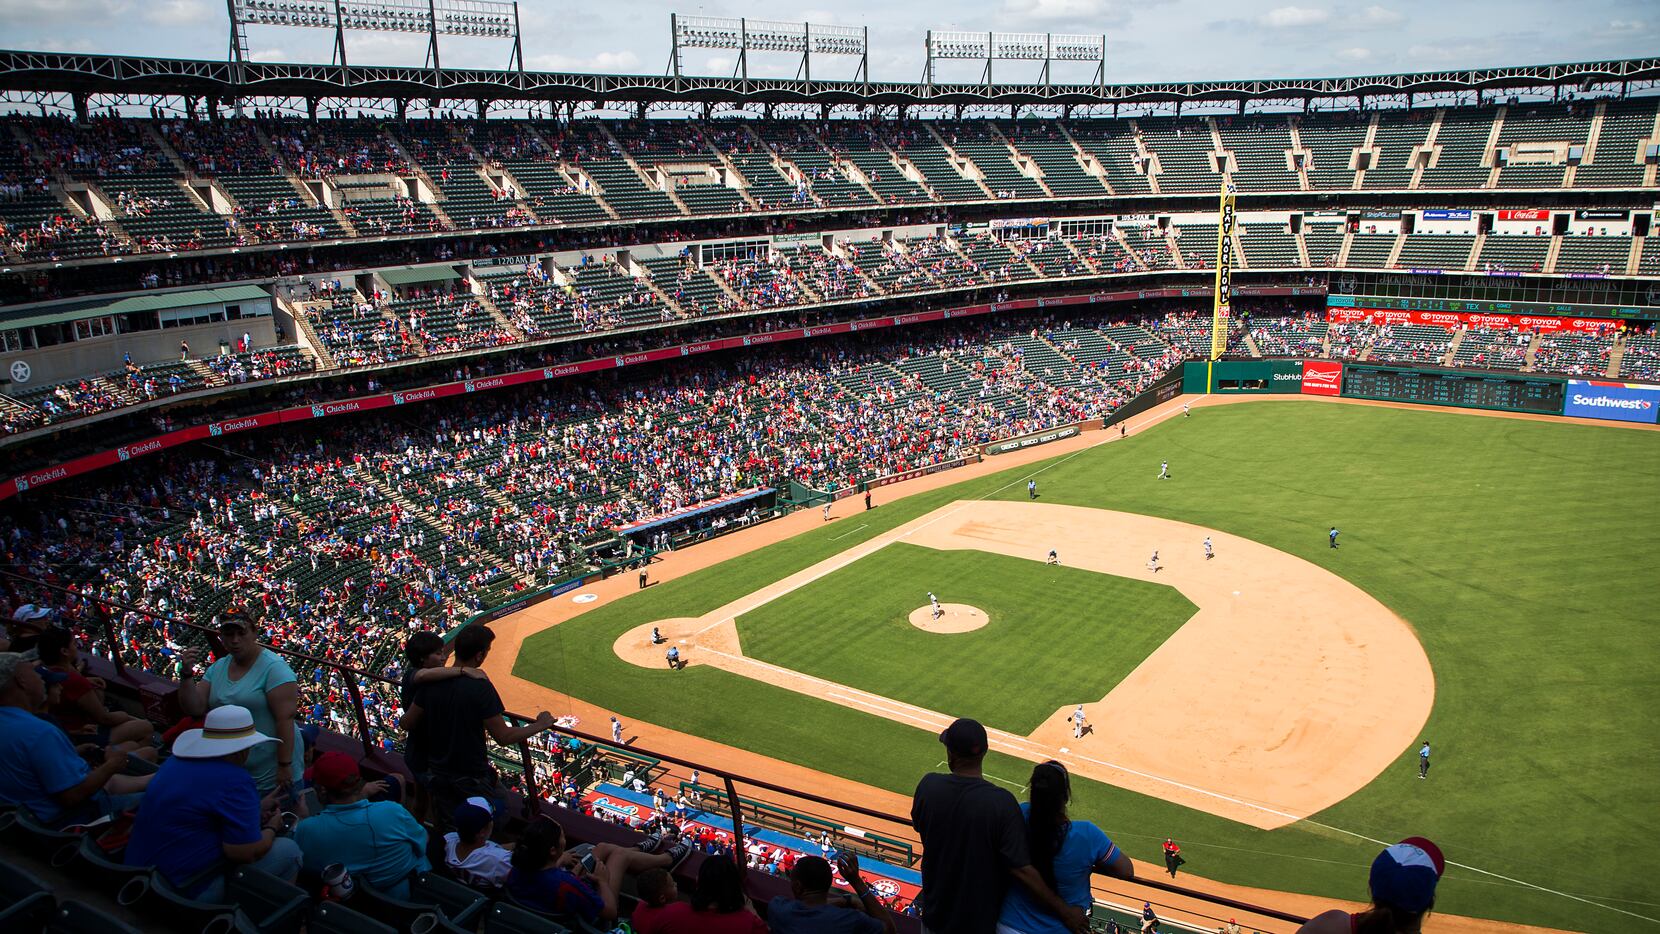 File photo of Globe Life Park in Arlington from 2017. (Smiley N. Pool/The Dallas Morning News)